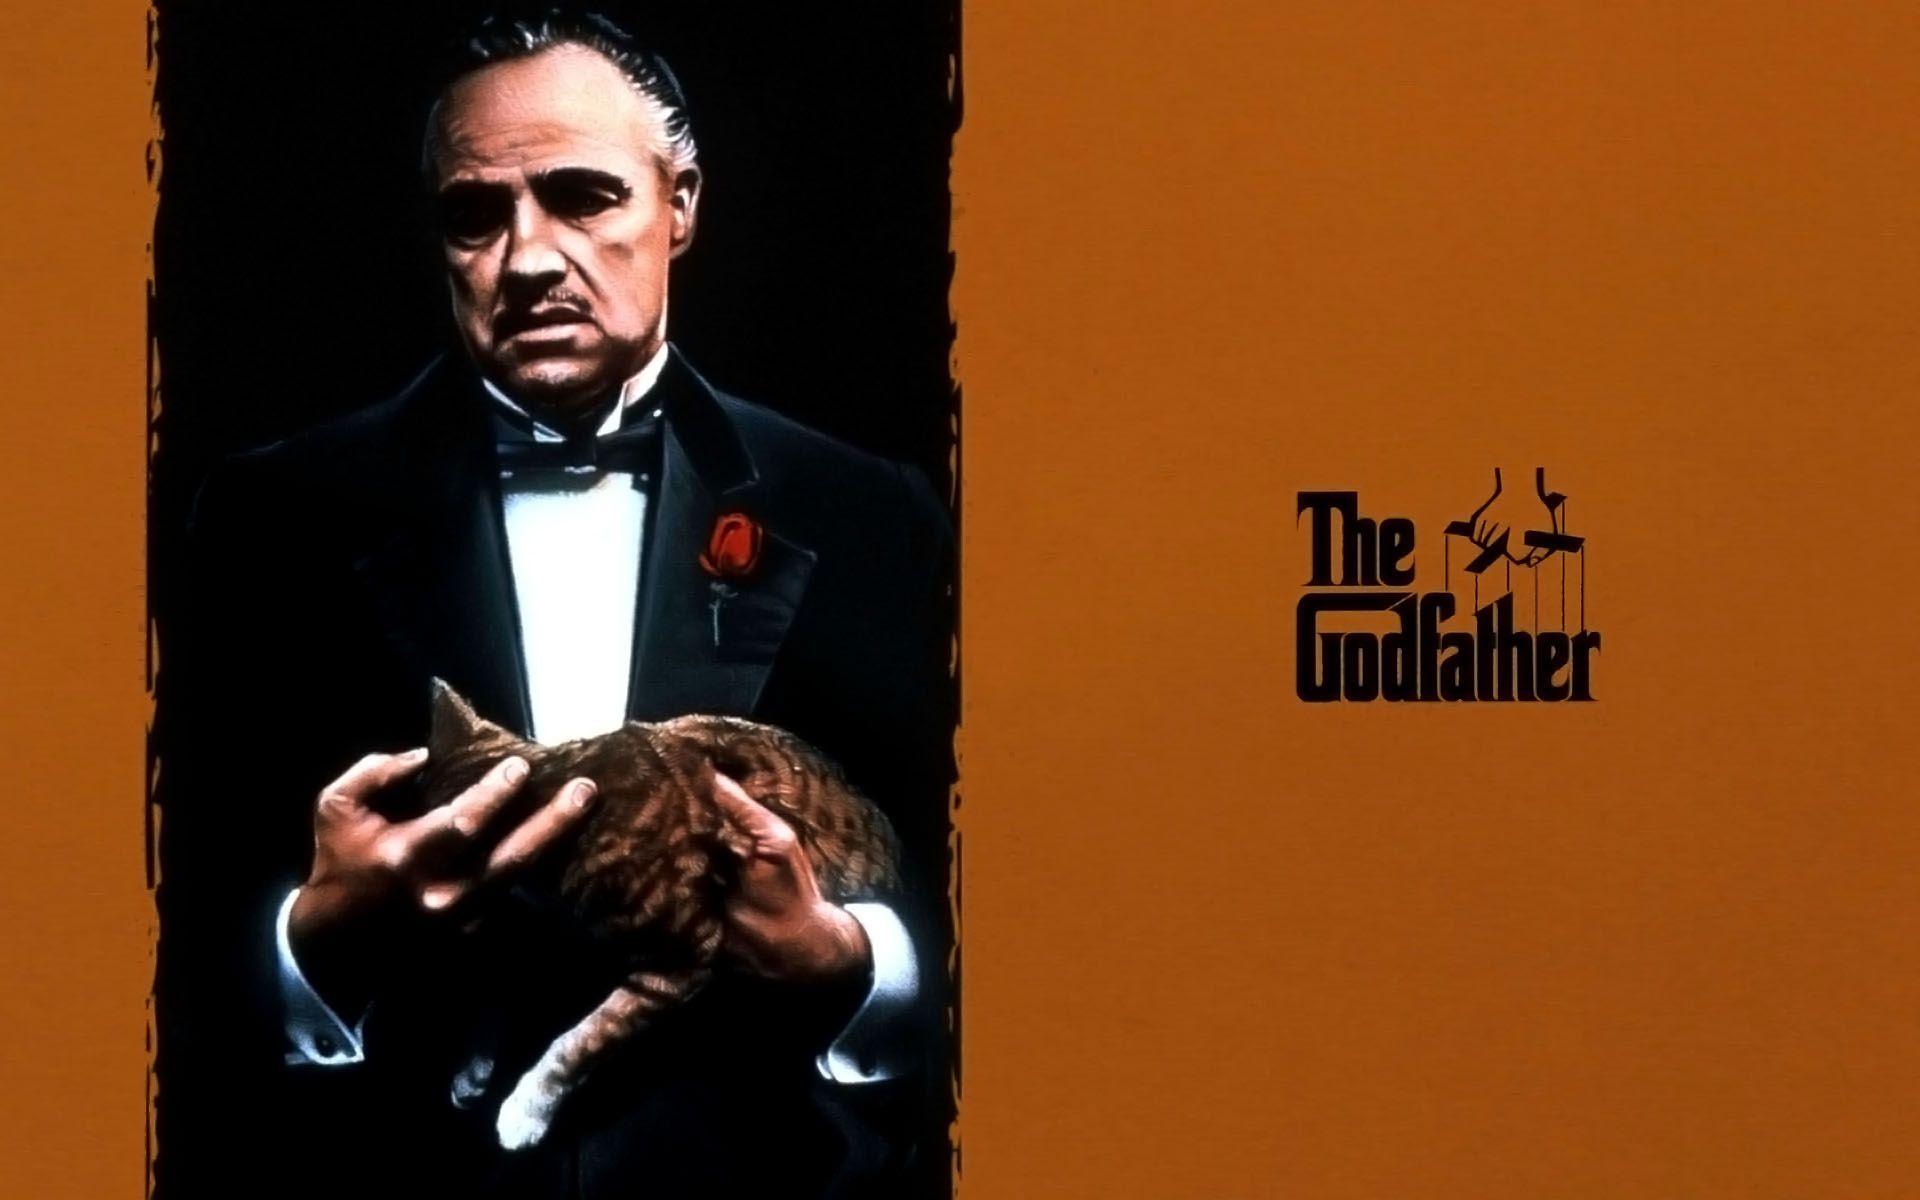 The Godfather NEW Image Wallpaper For iPad